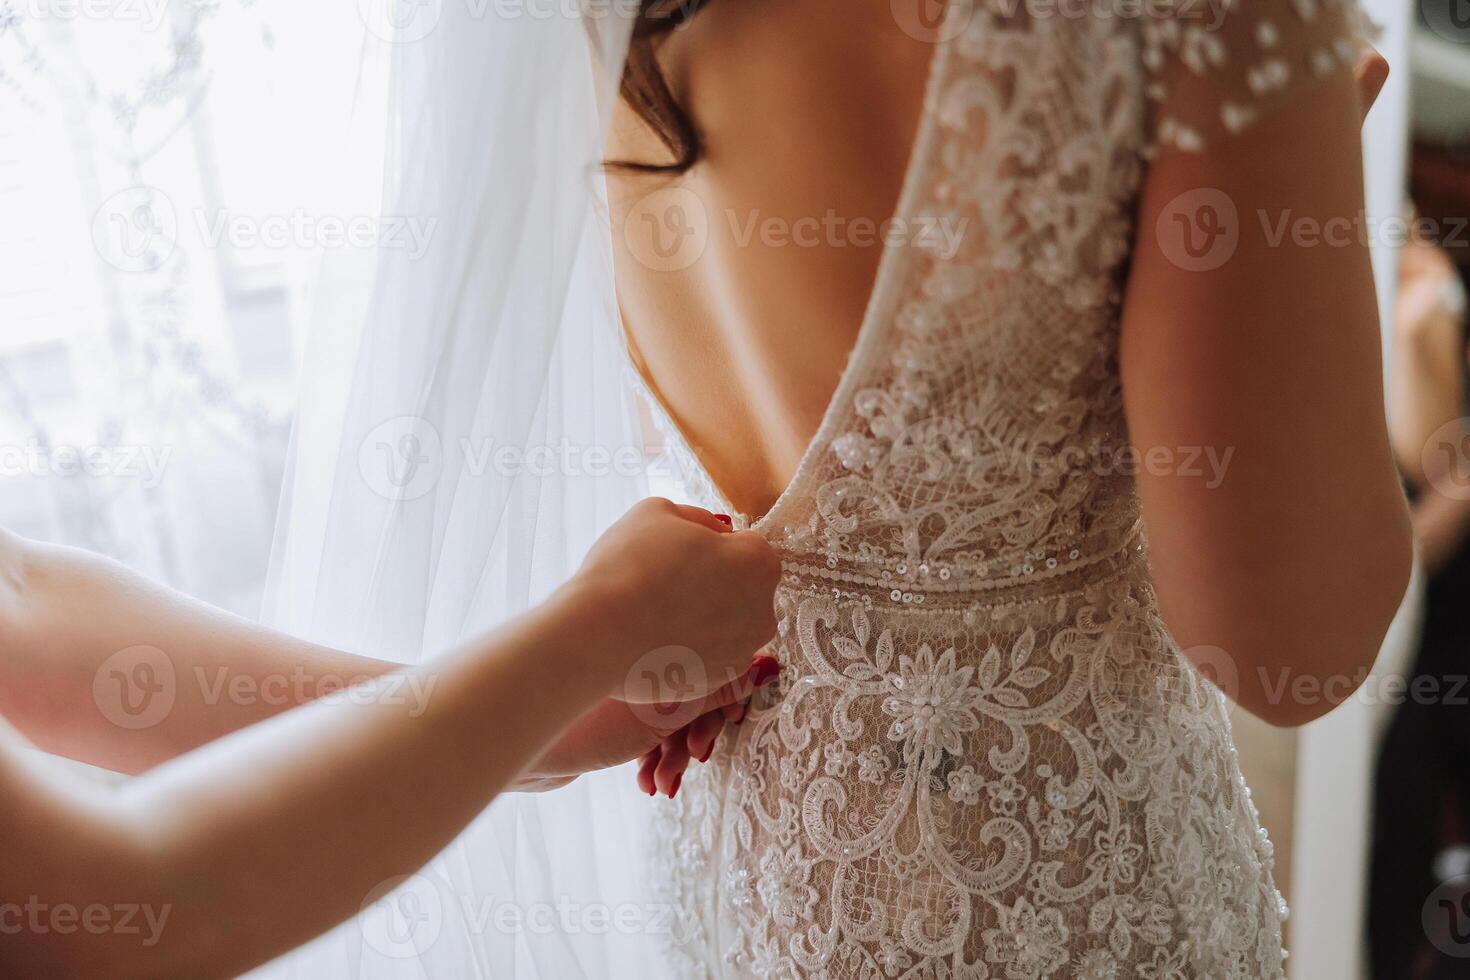 Morning of the bride. The bride's maid of honor helps the bride lace up her dress, fasten buttons on the dress or sleeves. Girlfriends help the bride fasten her dress photo